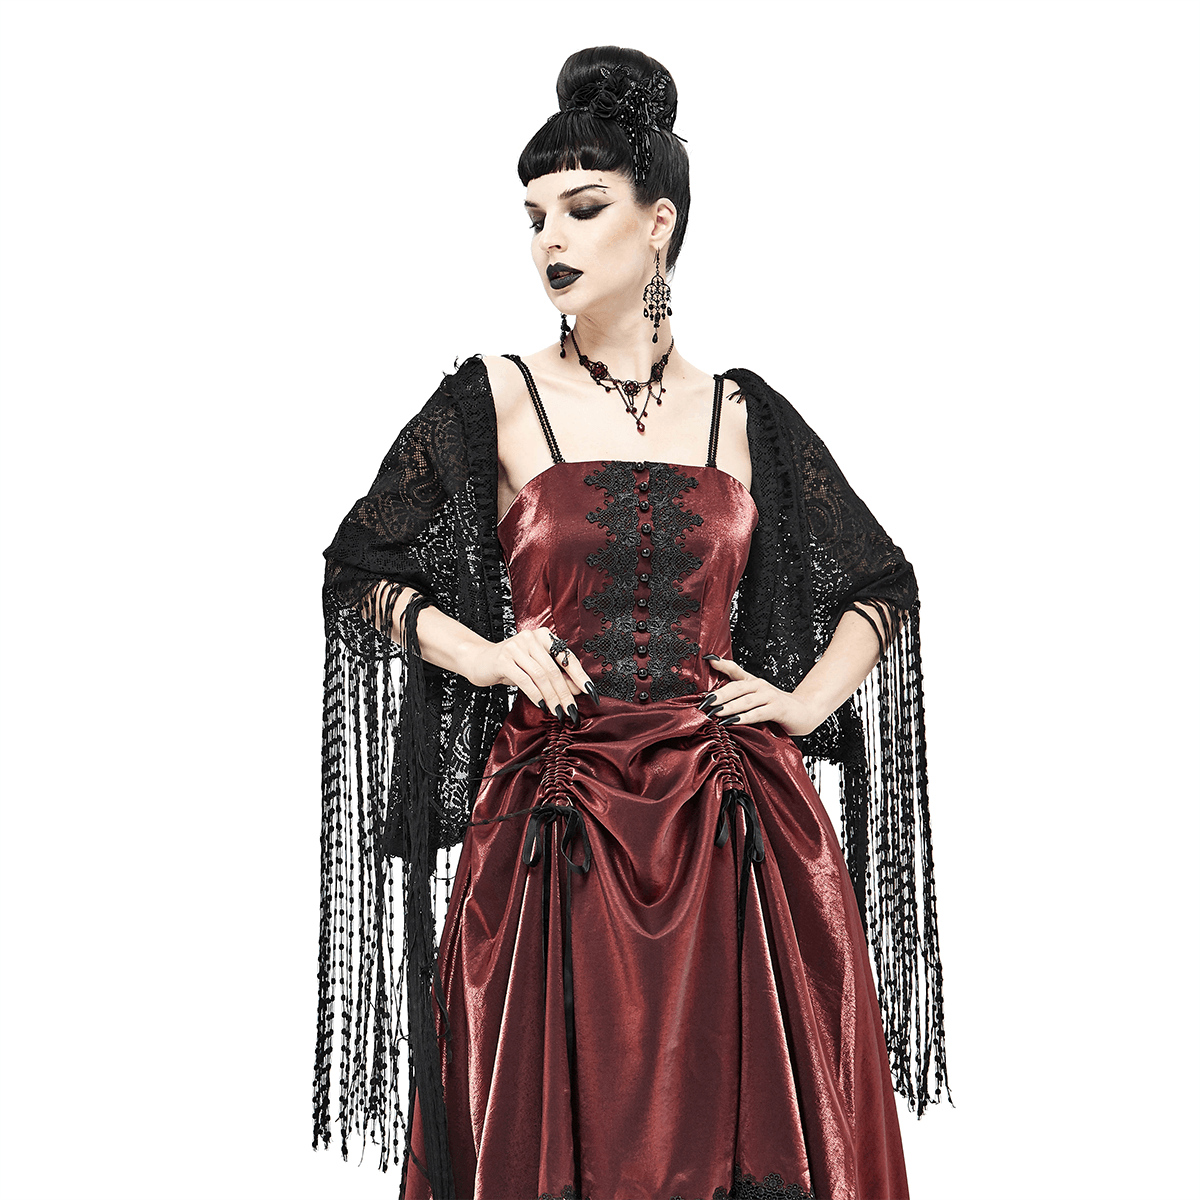 Gorgeous Lace Tassel Cape / Black Cape for Women with Fringe / Gothic Female Accessories - HARD'N'HEAVY